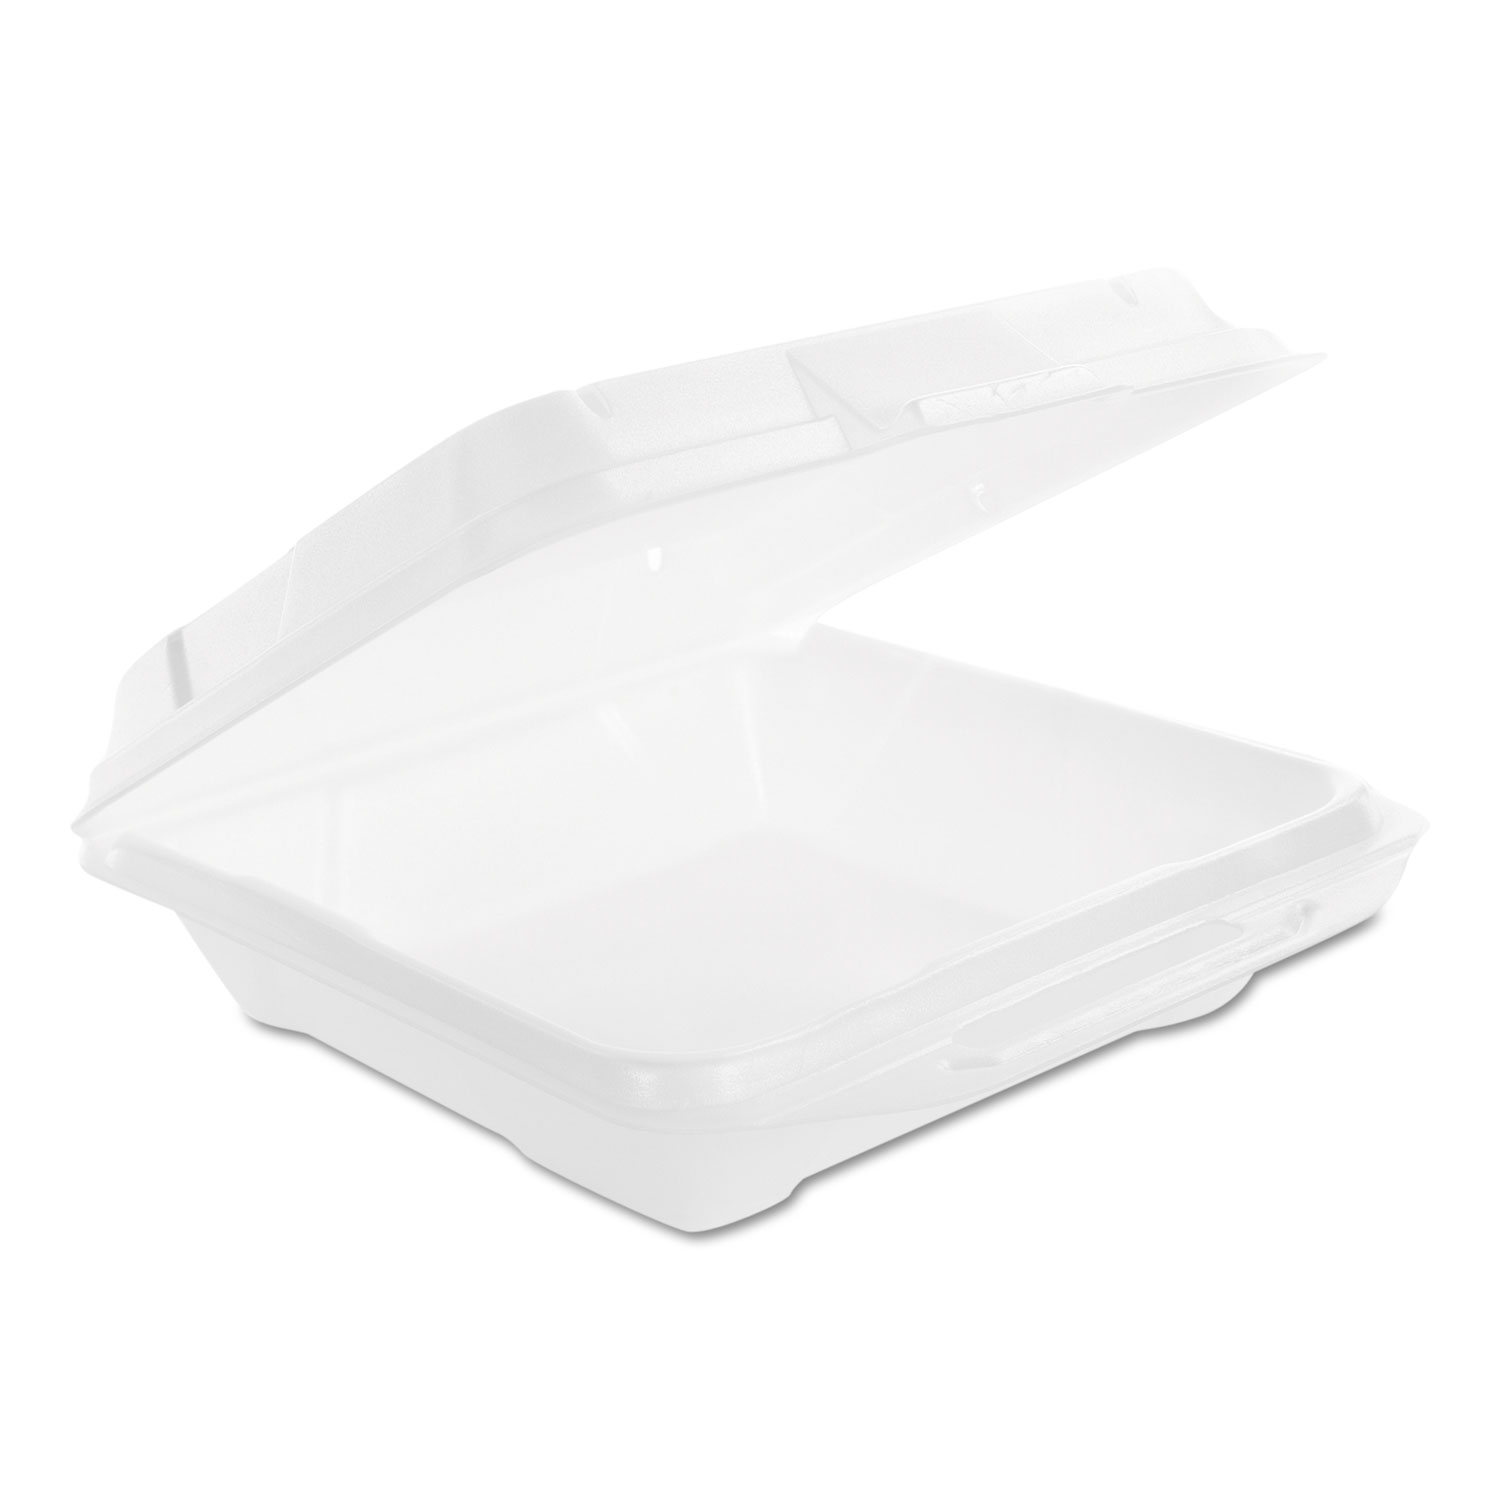  Genpak 20010-V--- Hinged Carryout Containers, Foam, White, Vented, 9 1/4W x 9 1/4D x 3H, 200/CT (GNP20010V) 